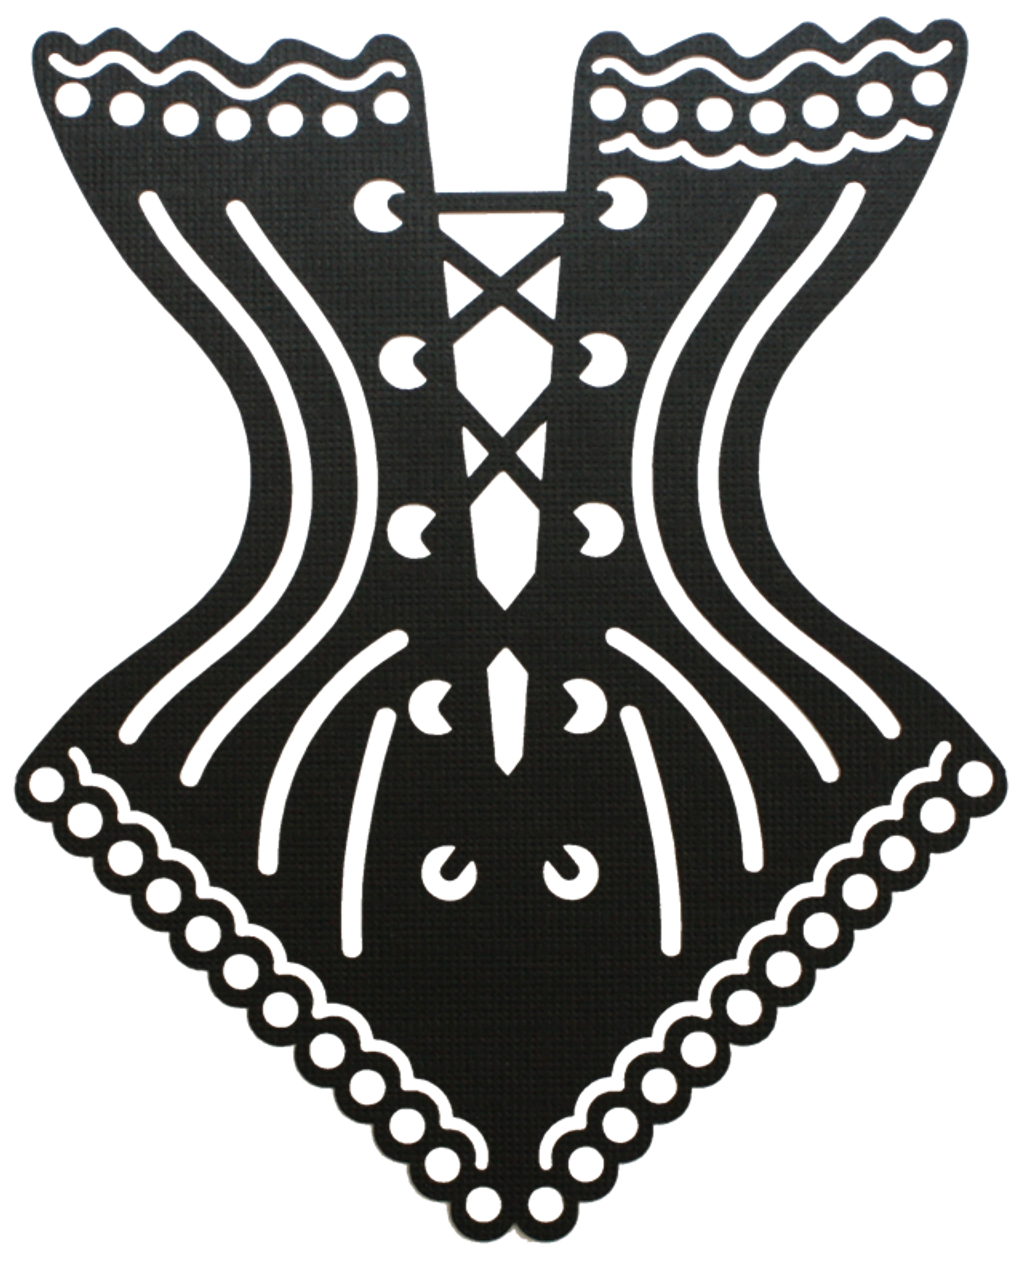 https://cdn11.bigcommerce.com/s-7fcgcq/images/stencil/1280x1280/products/4367/1229/Silhouettes-CorsetbyLaurelLane__26464.1444427243.png?c=2